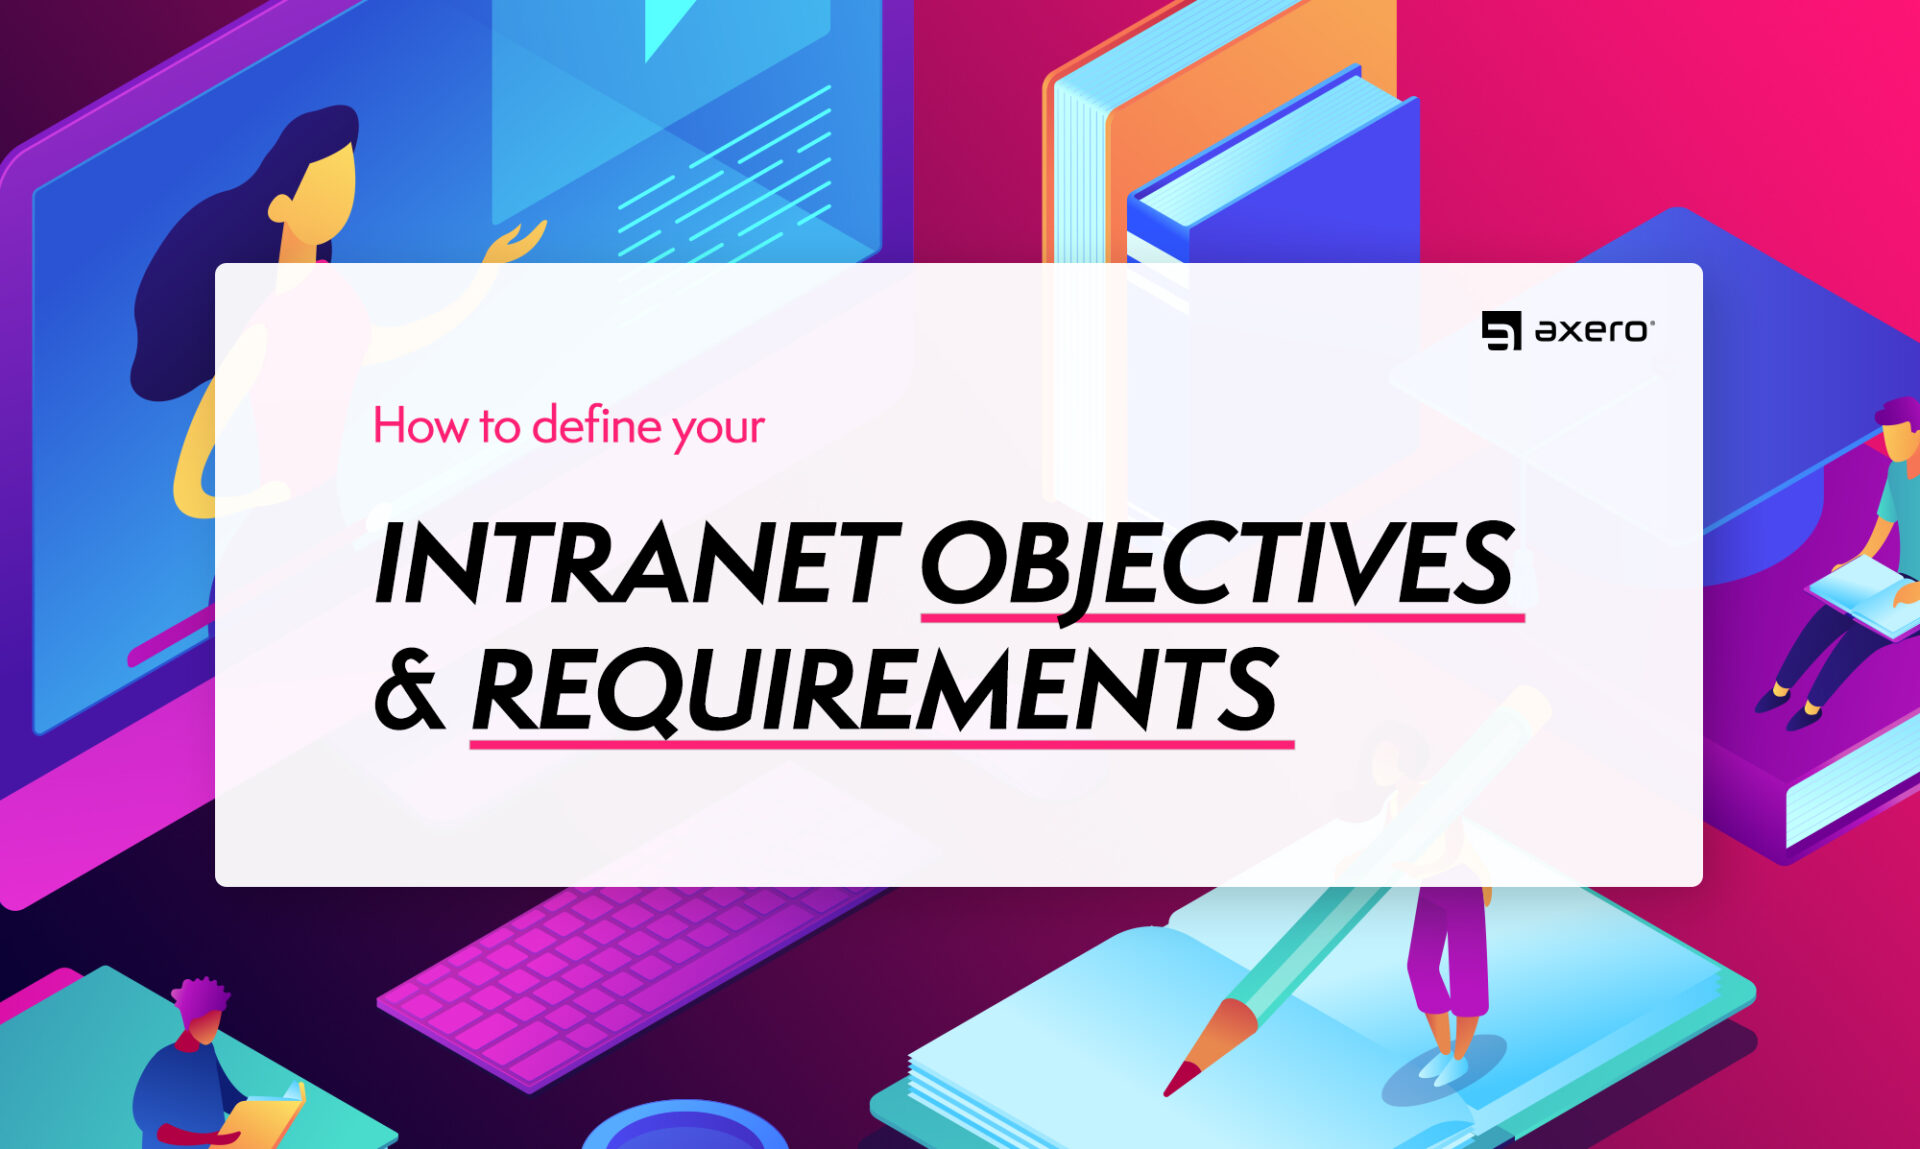 How to Define Your Intranet Objectives and Requirements